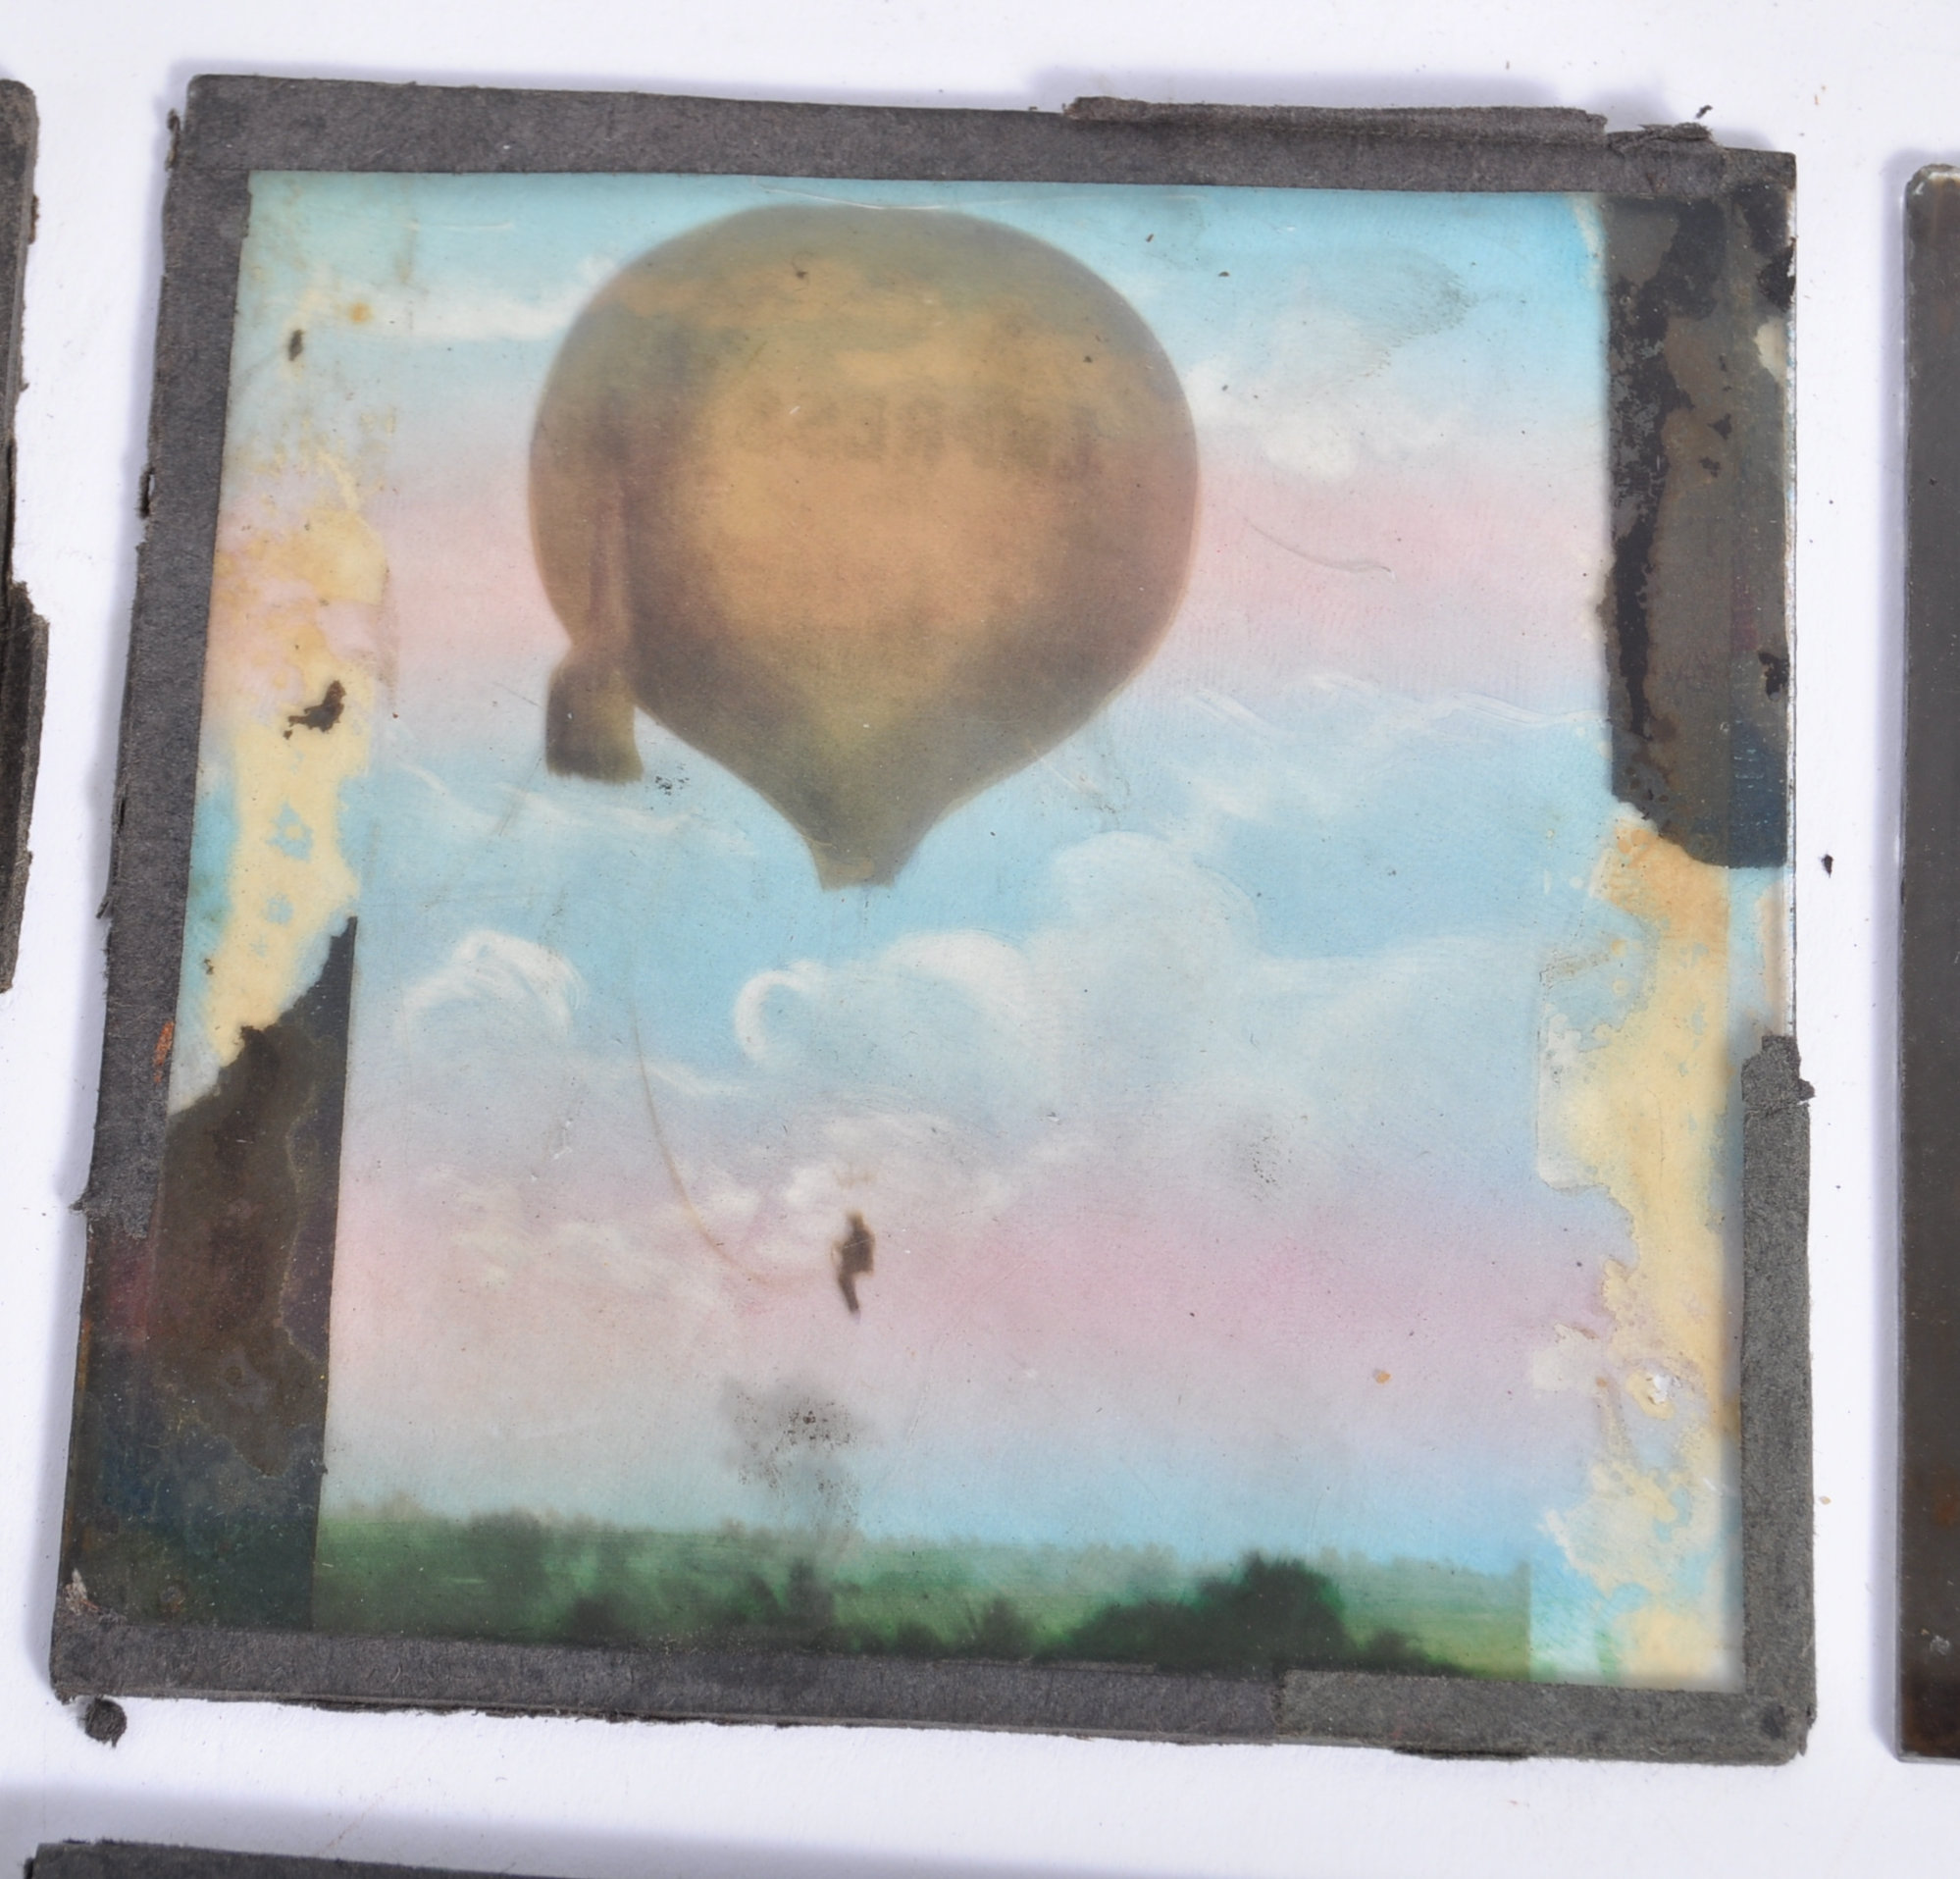 COLLECTION OF VICTORIAN 19TH CENTURY MAGIC LANTERN GLASS SLIDES - Image 7 of 8